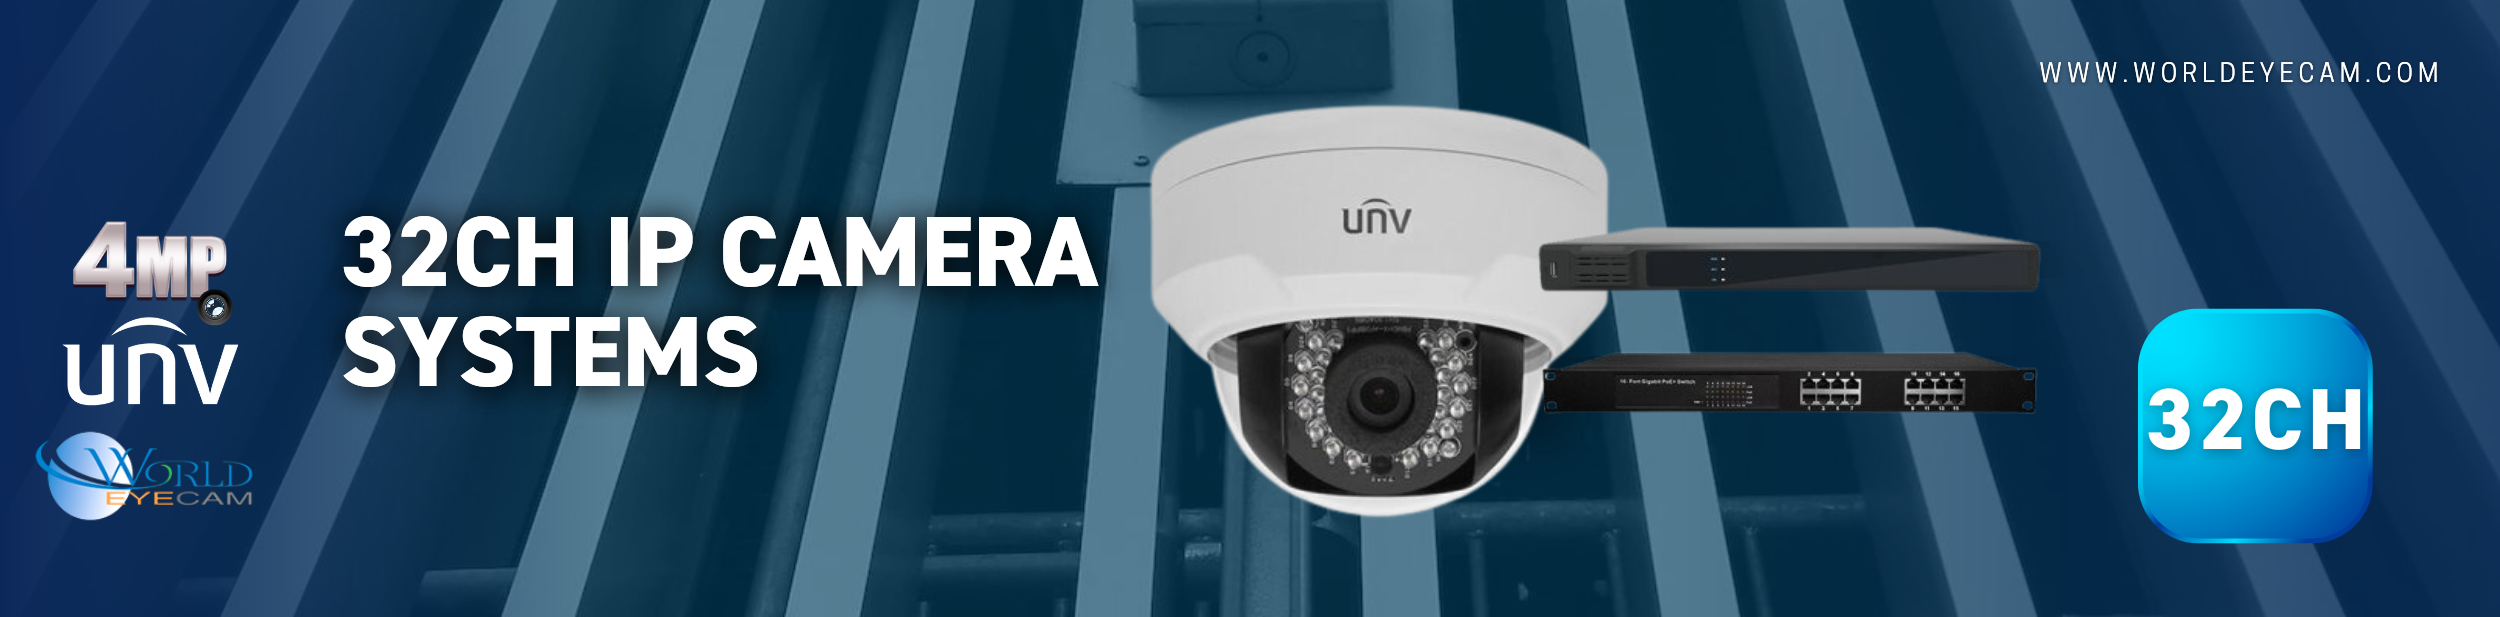 IP Camera Systems - 32ch Uniview